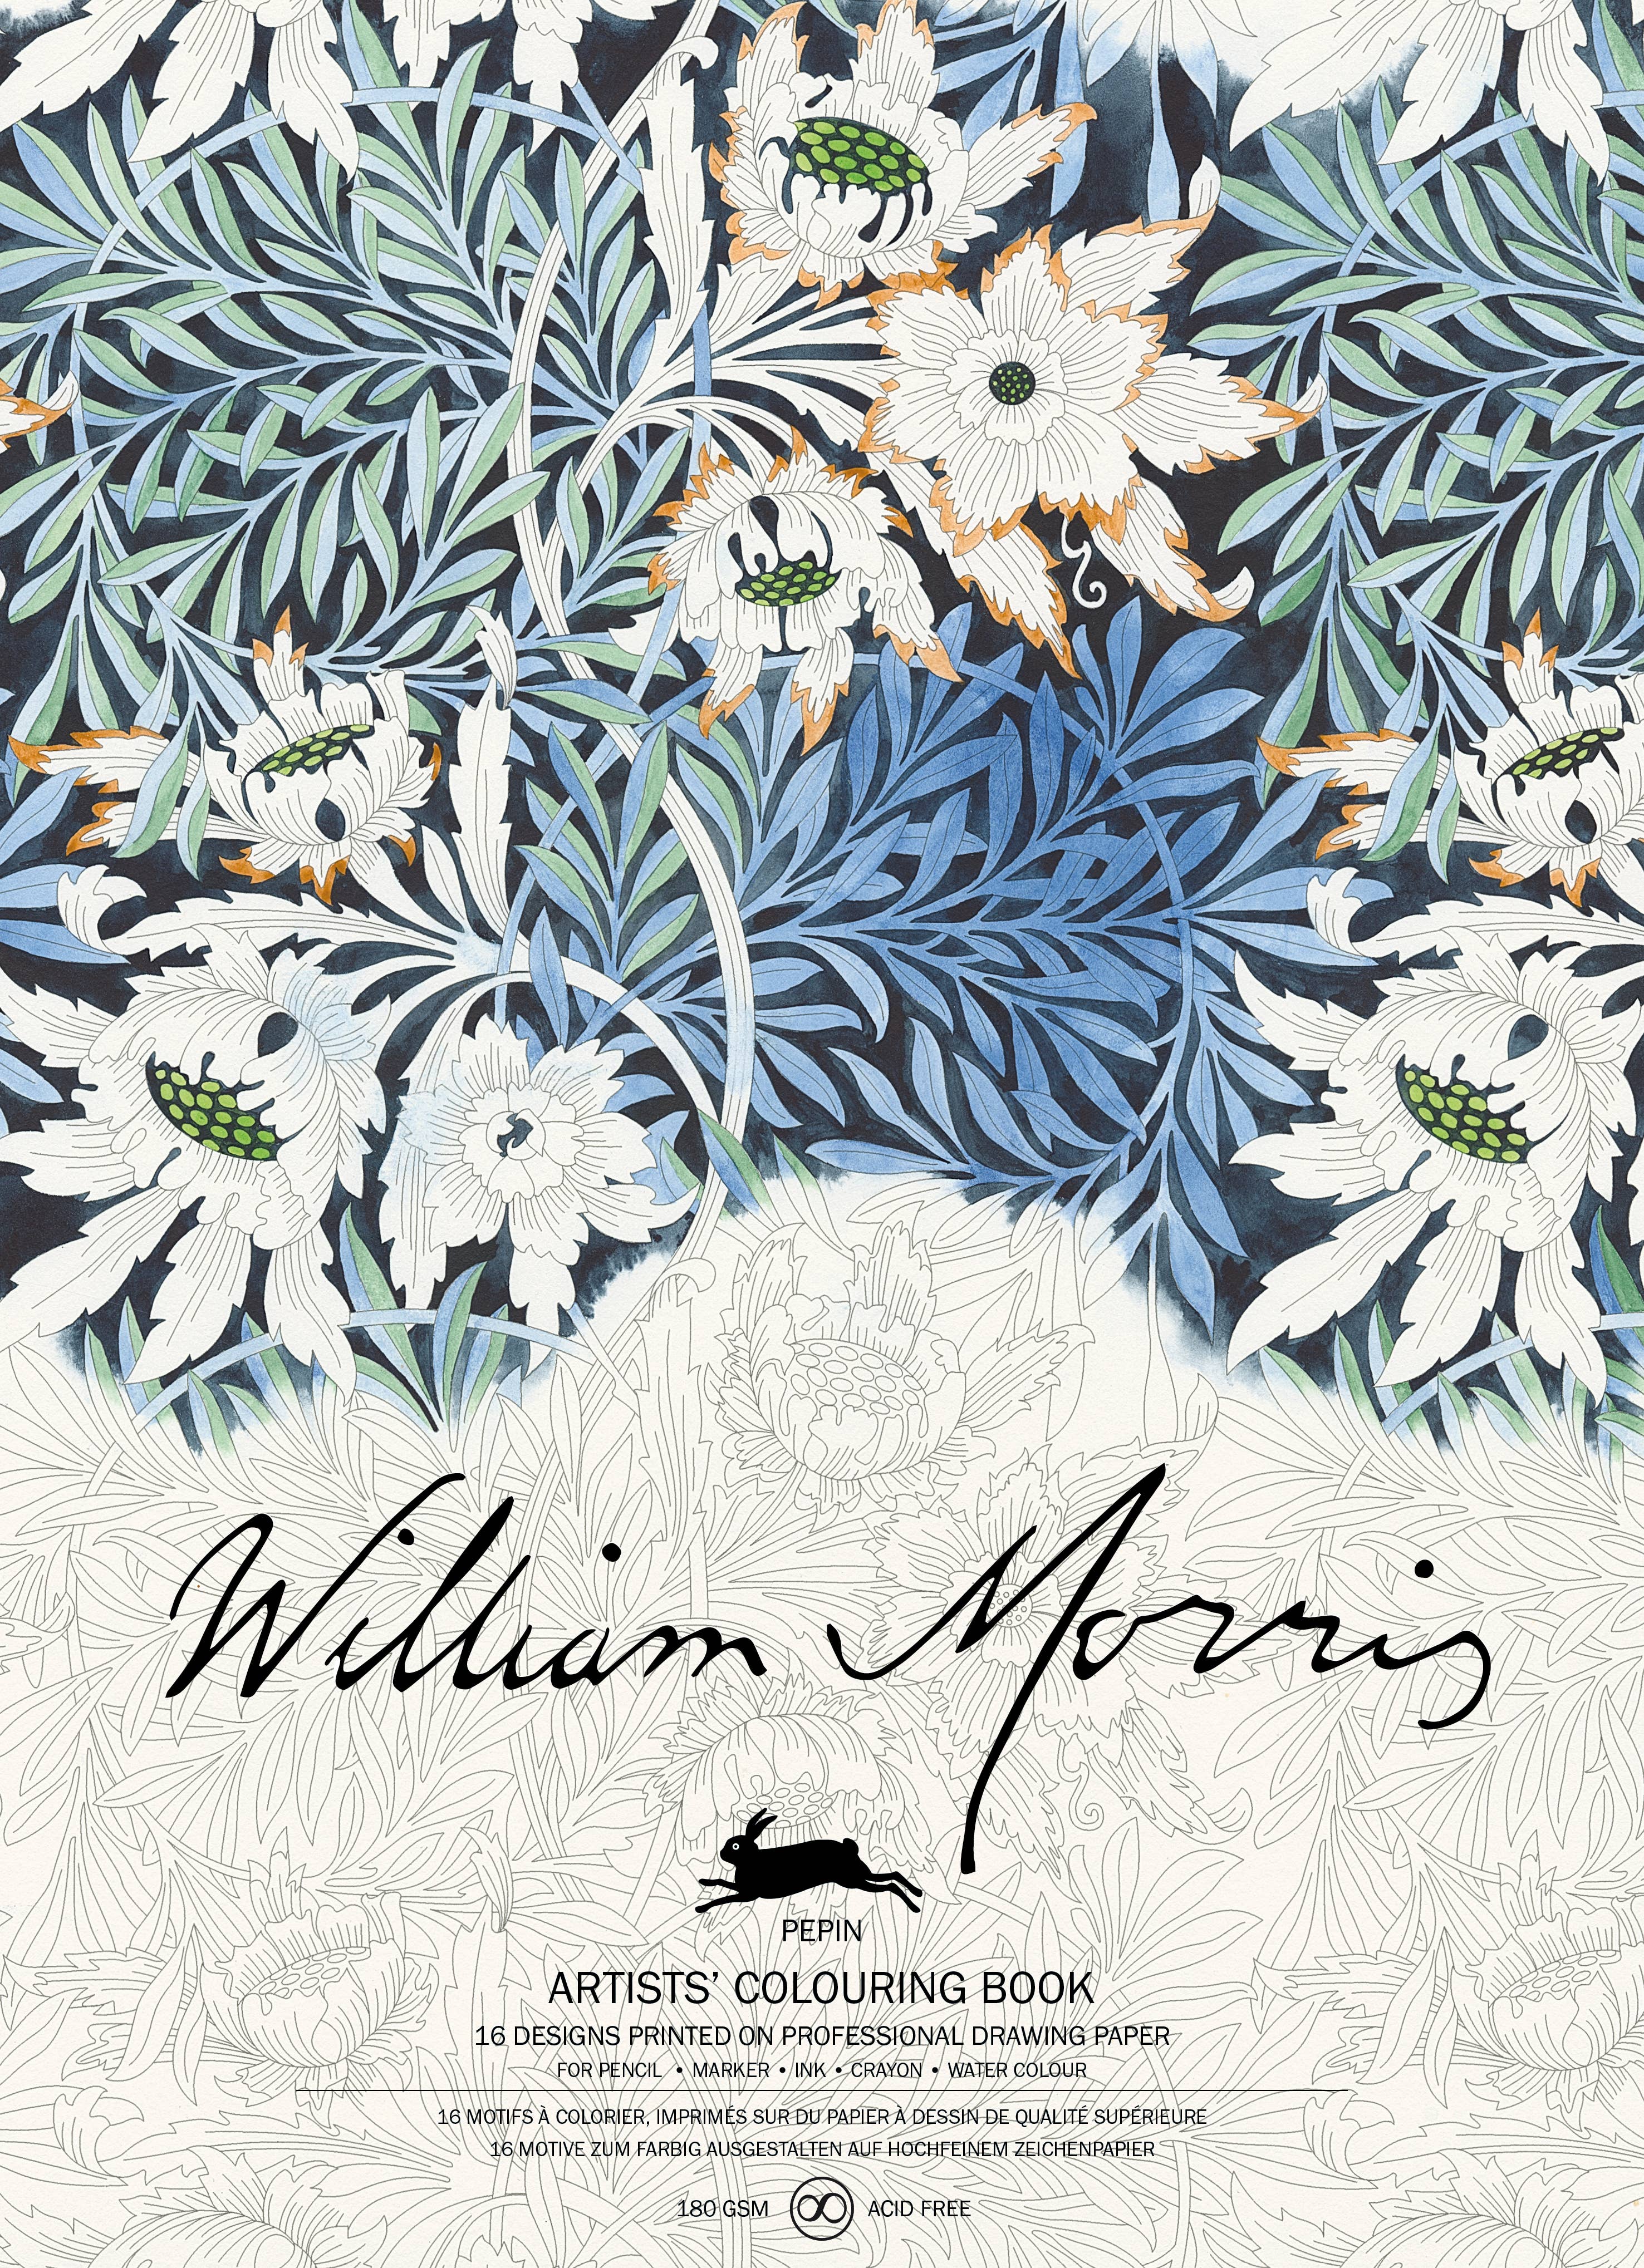 Artistic Reverie: A William Morris Inspired Professional Colouring Journey